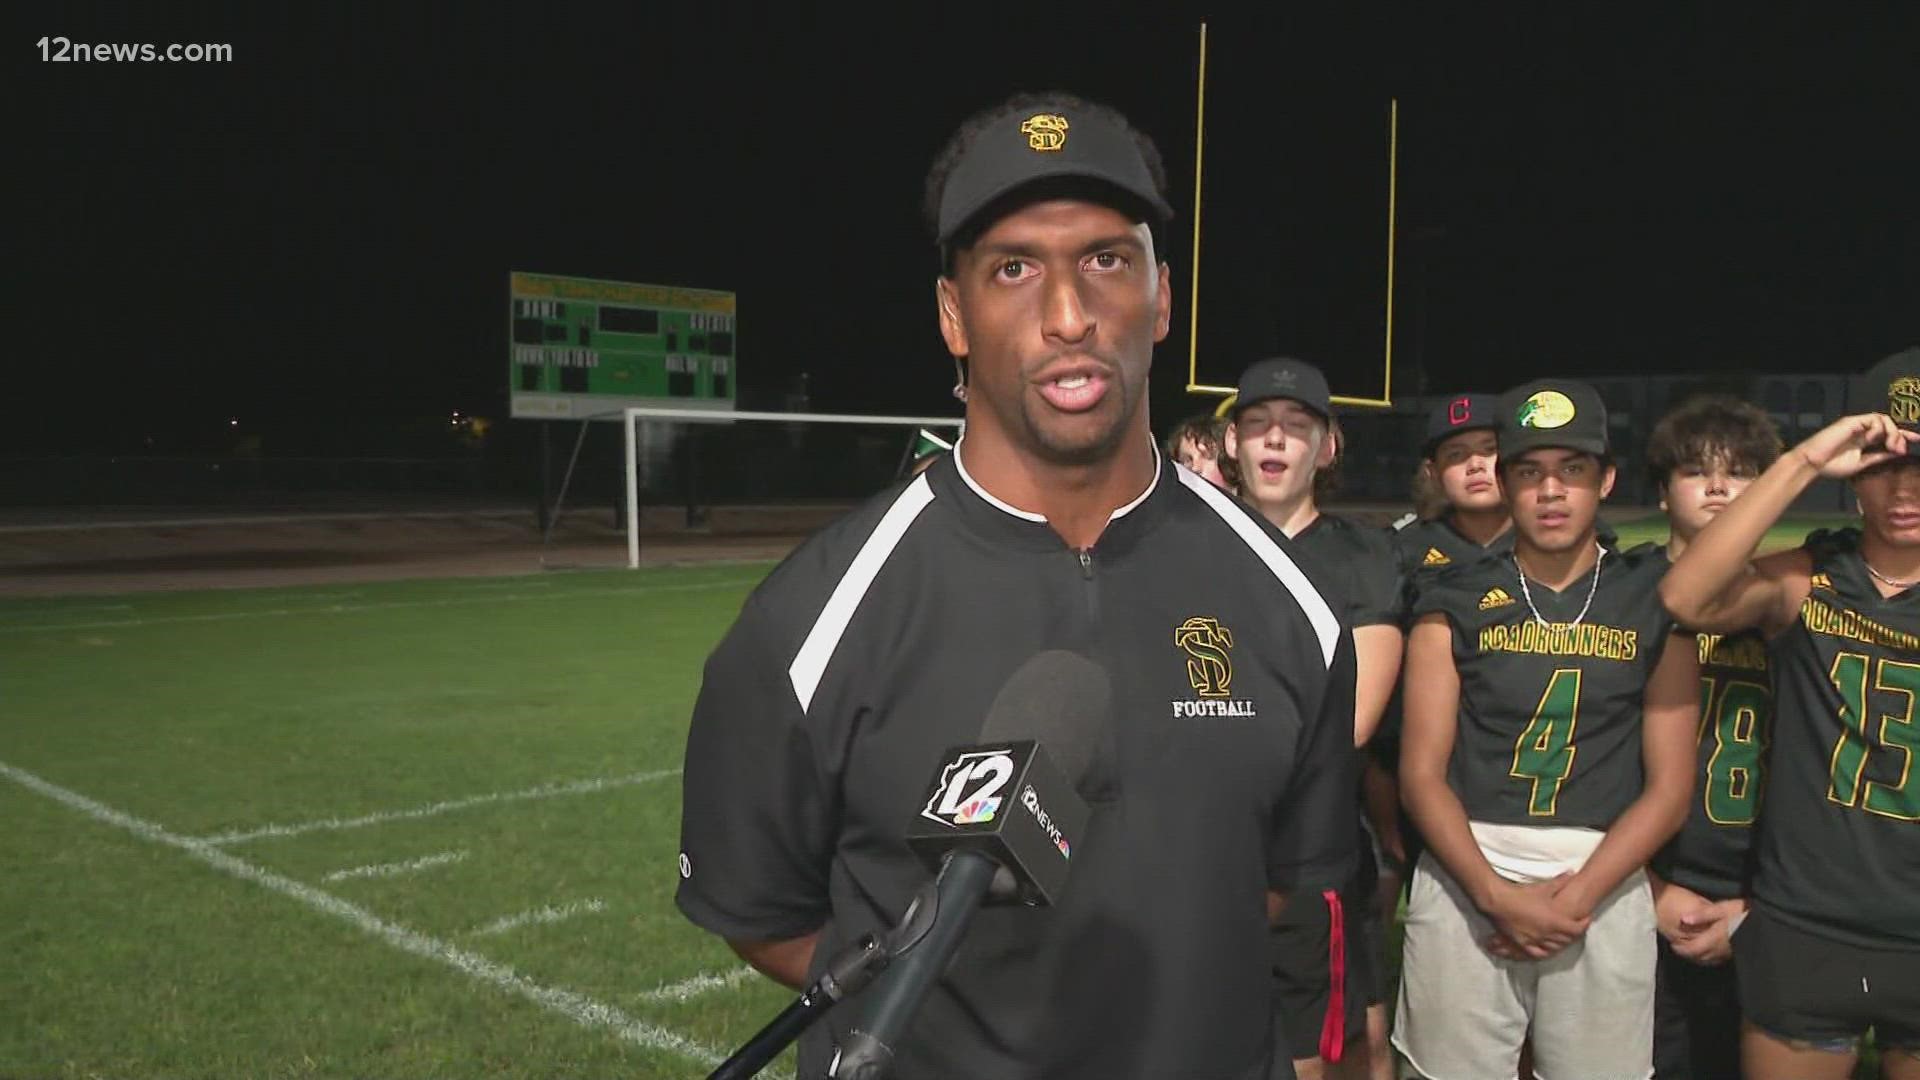 Coach Kerry Taylor said that the players and the future look bright for San Tan Charter.